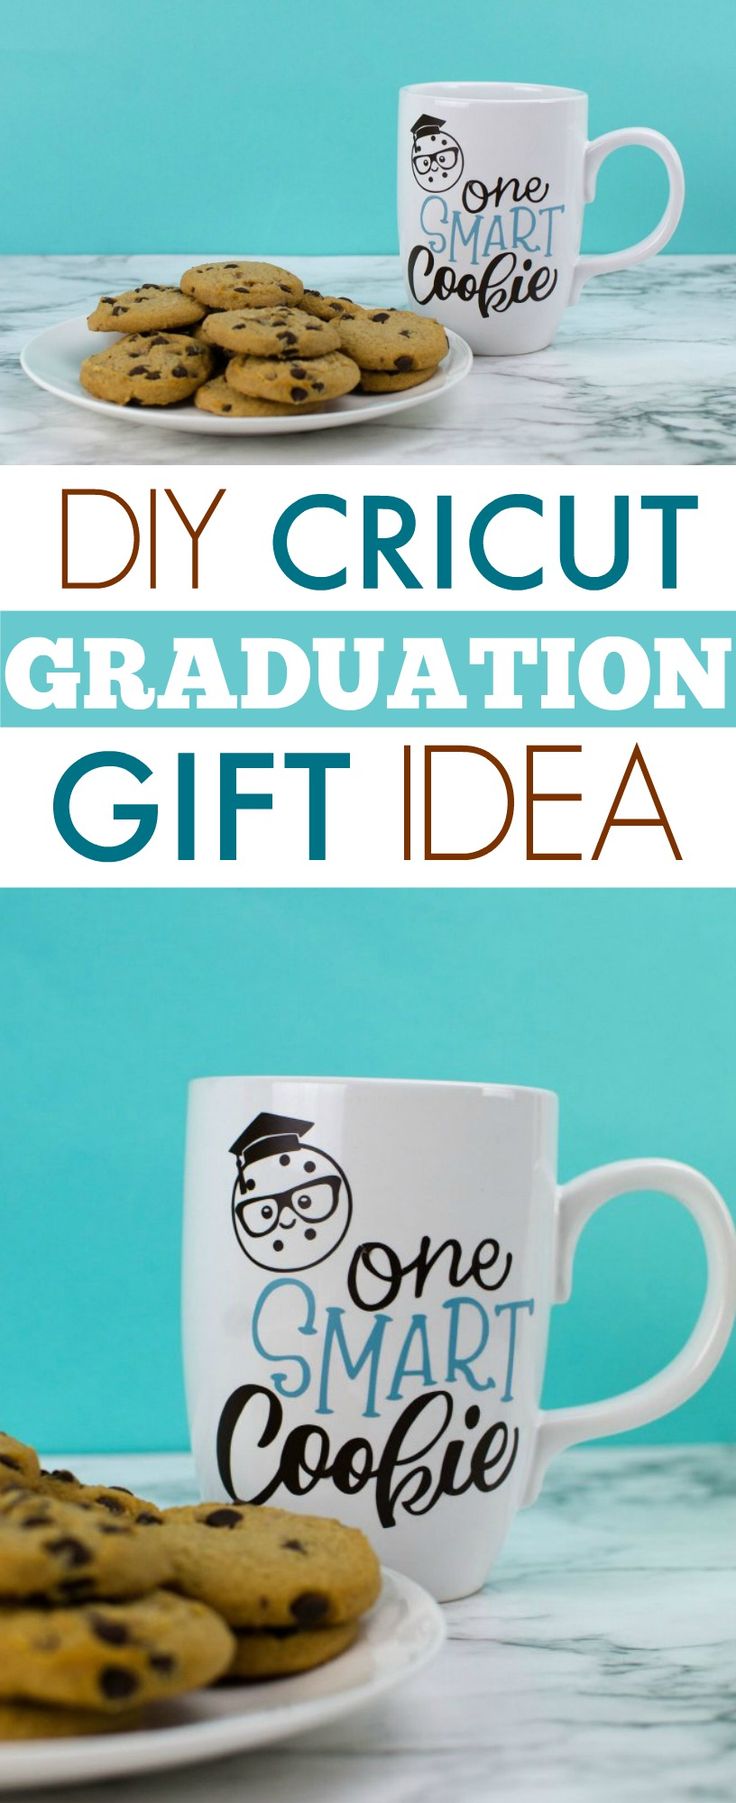 This DIY Cricut Graduation Gift – One Smart Cookie Mug is the perfect solutio...